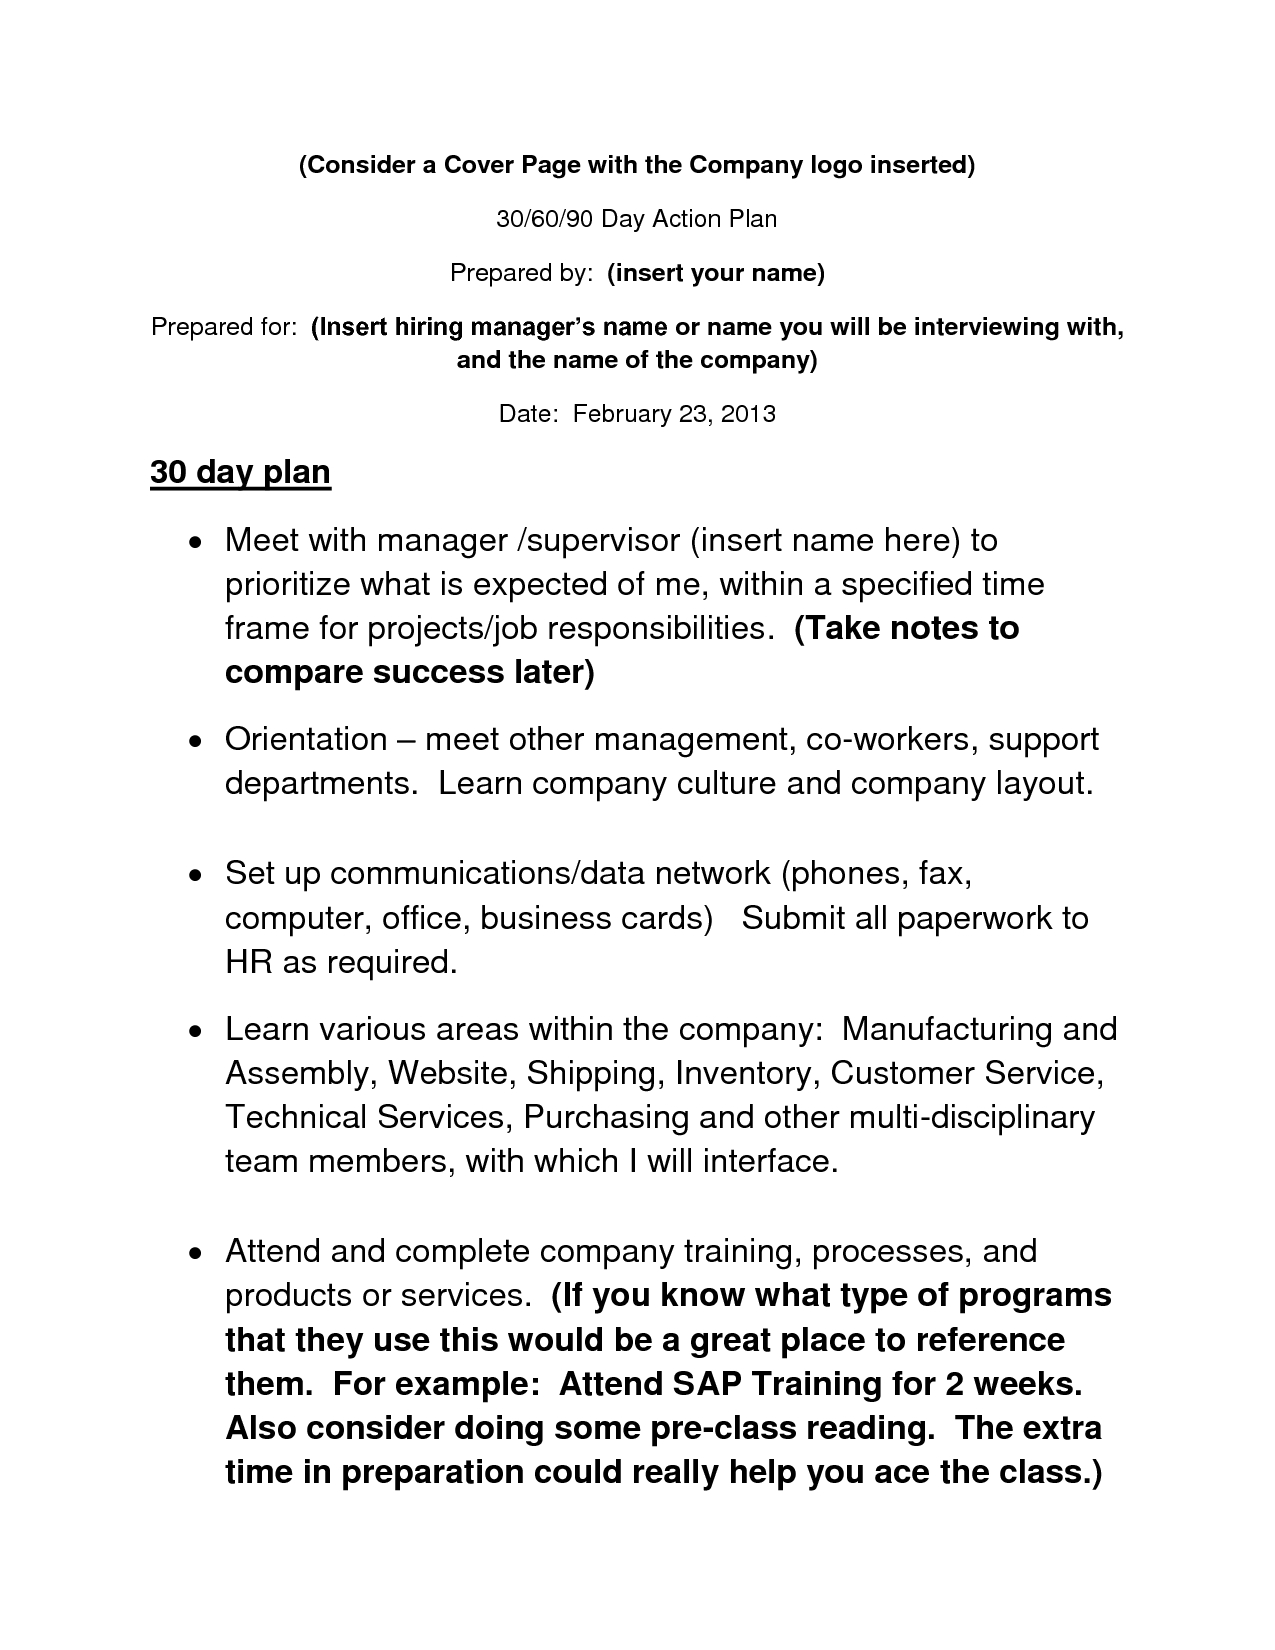 Day Action Plan Template  Info   Day Plan Business for Interview Business Plan Template